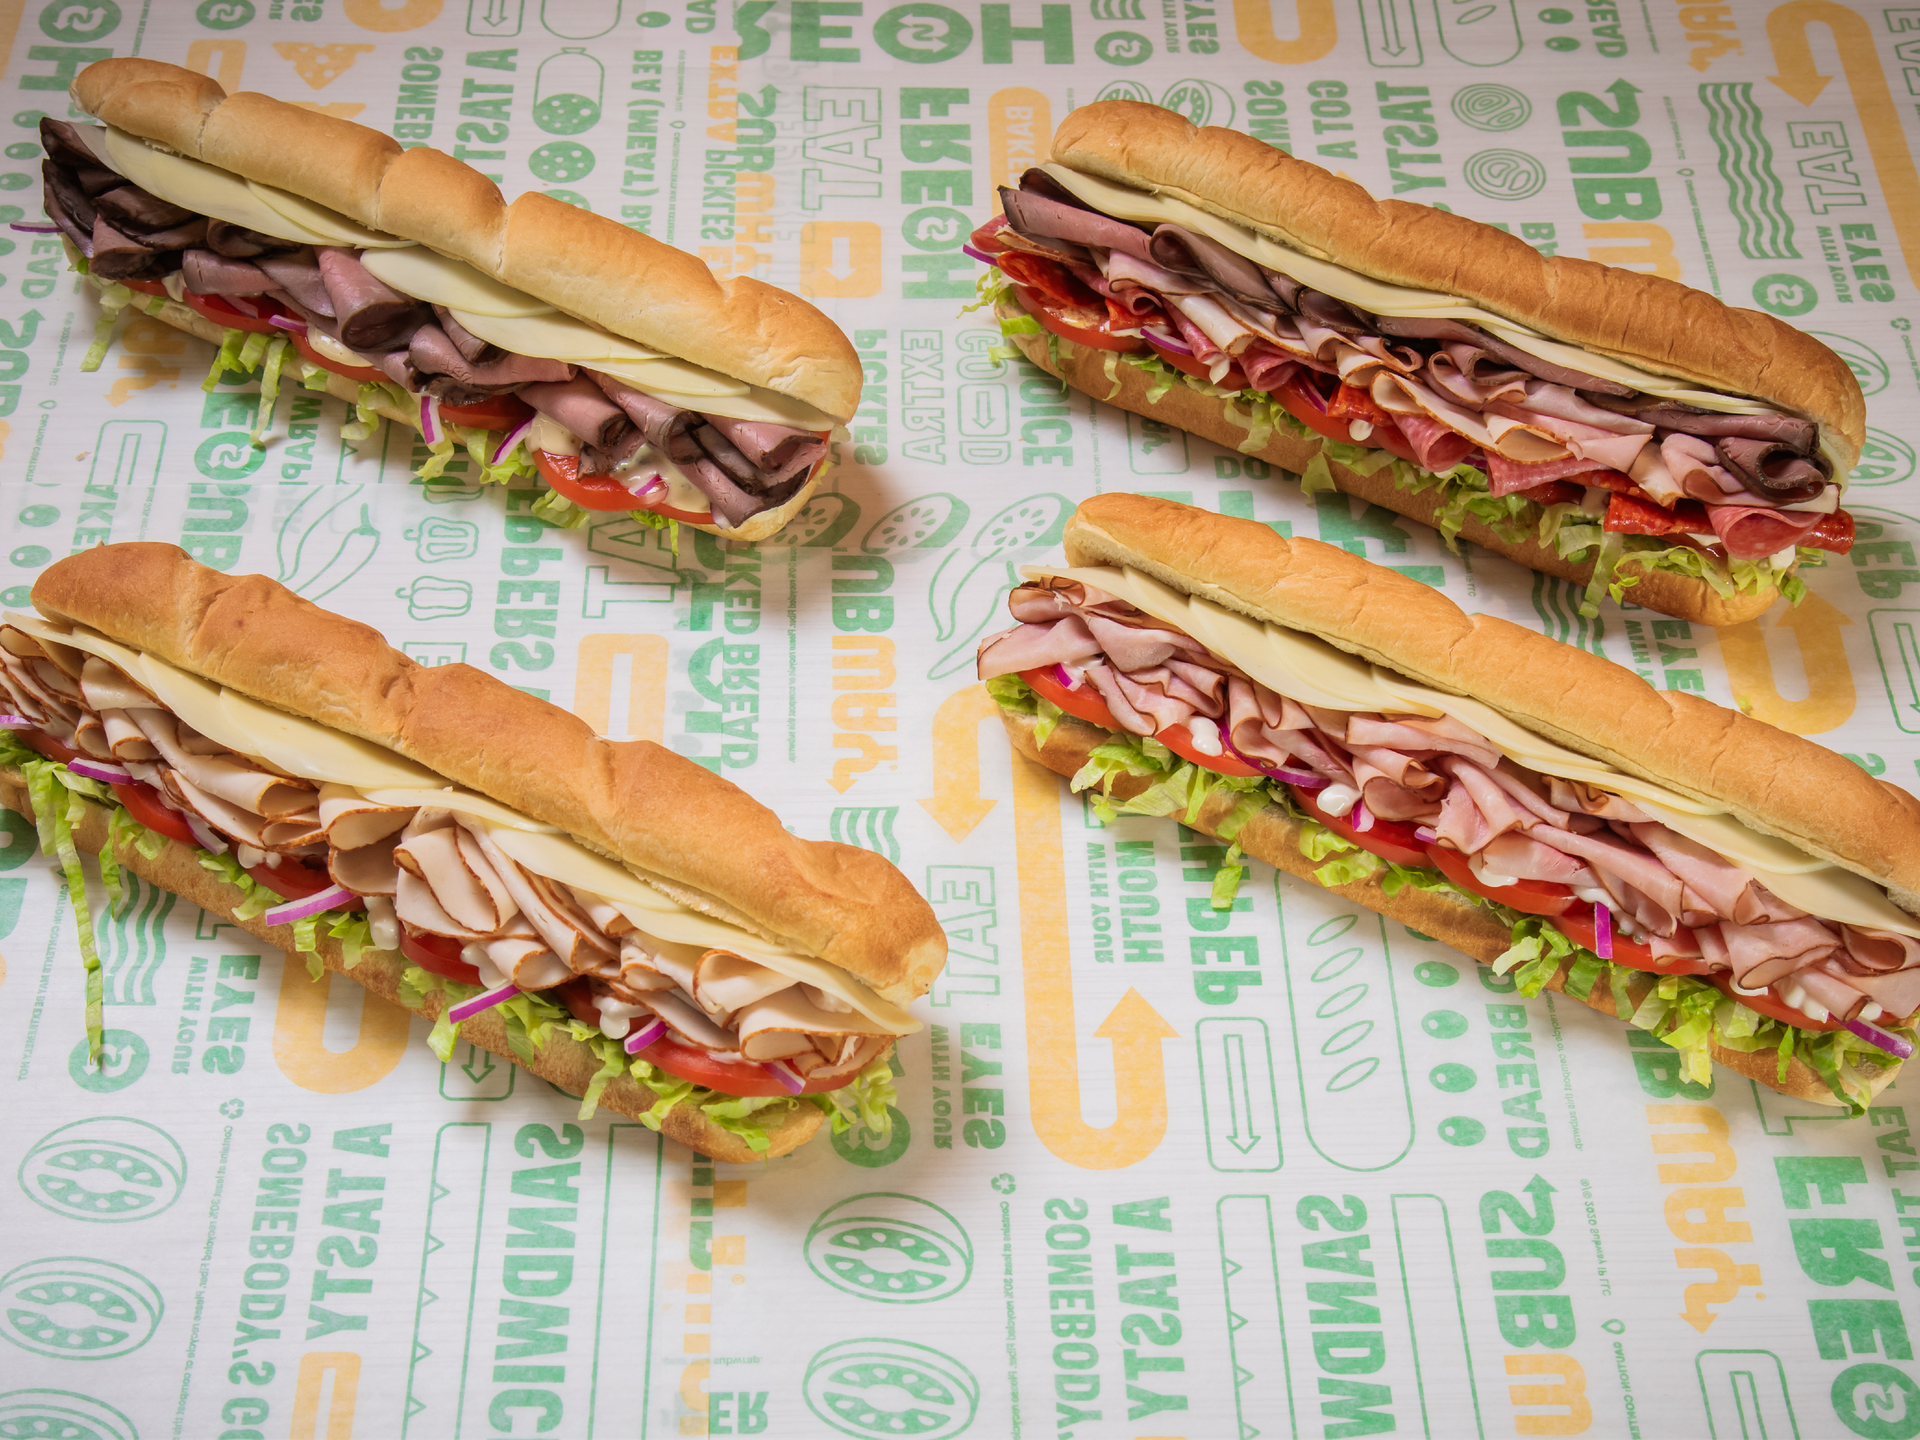 Subway Sandwich Menu and Prices